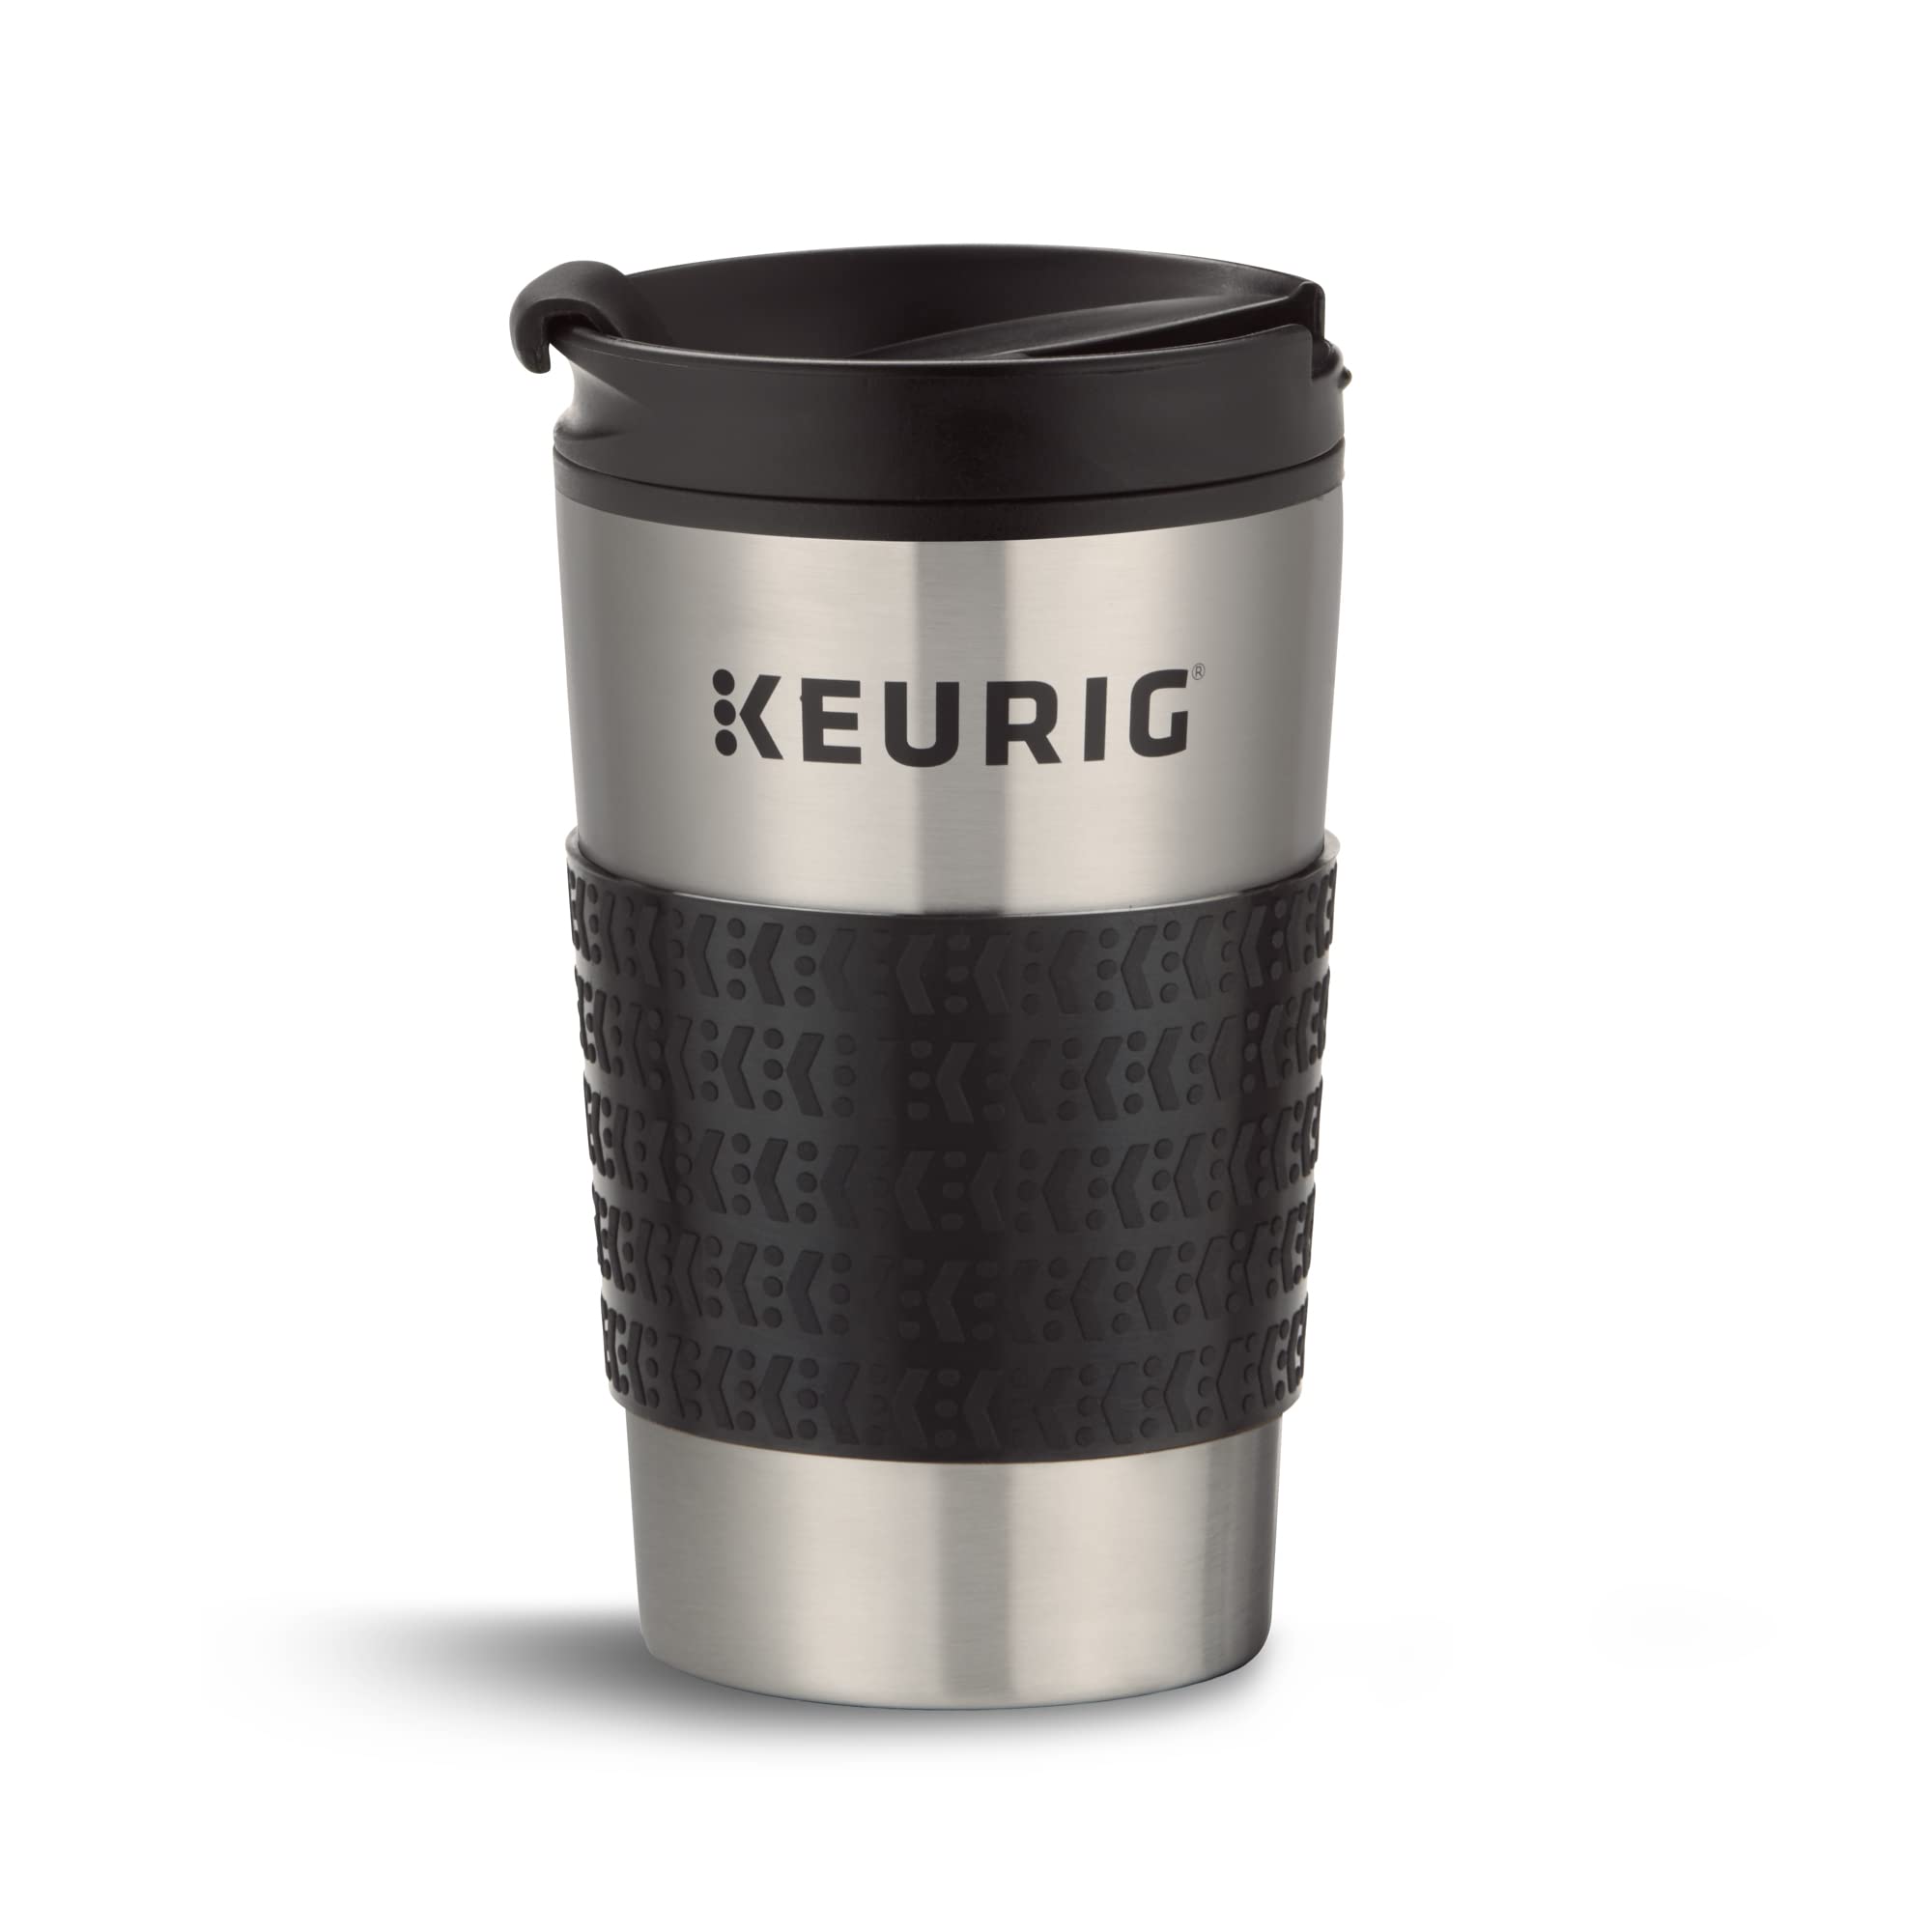 Book Cover Keurig Travel Mug Fits K-Cup Pod Coffee Maker, 1 Count (Pack of 1), Stainless Steel